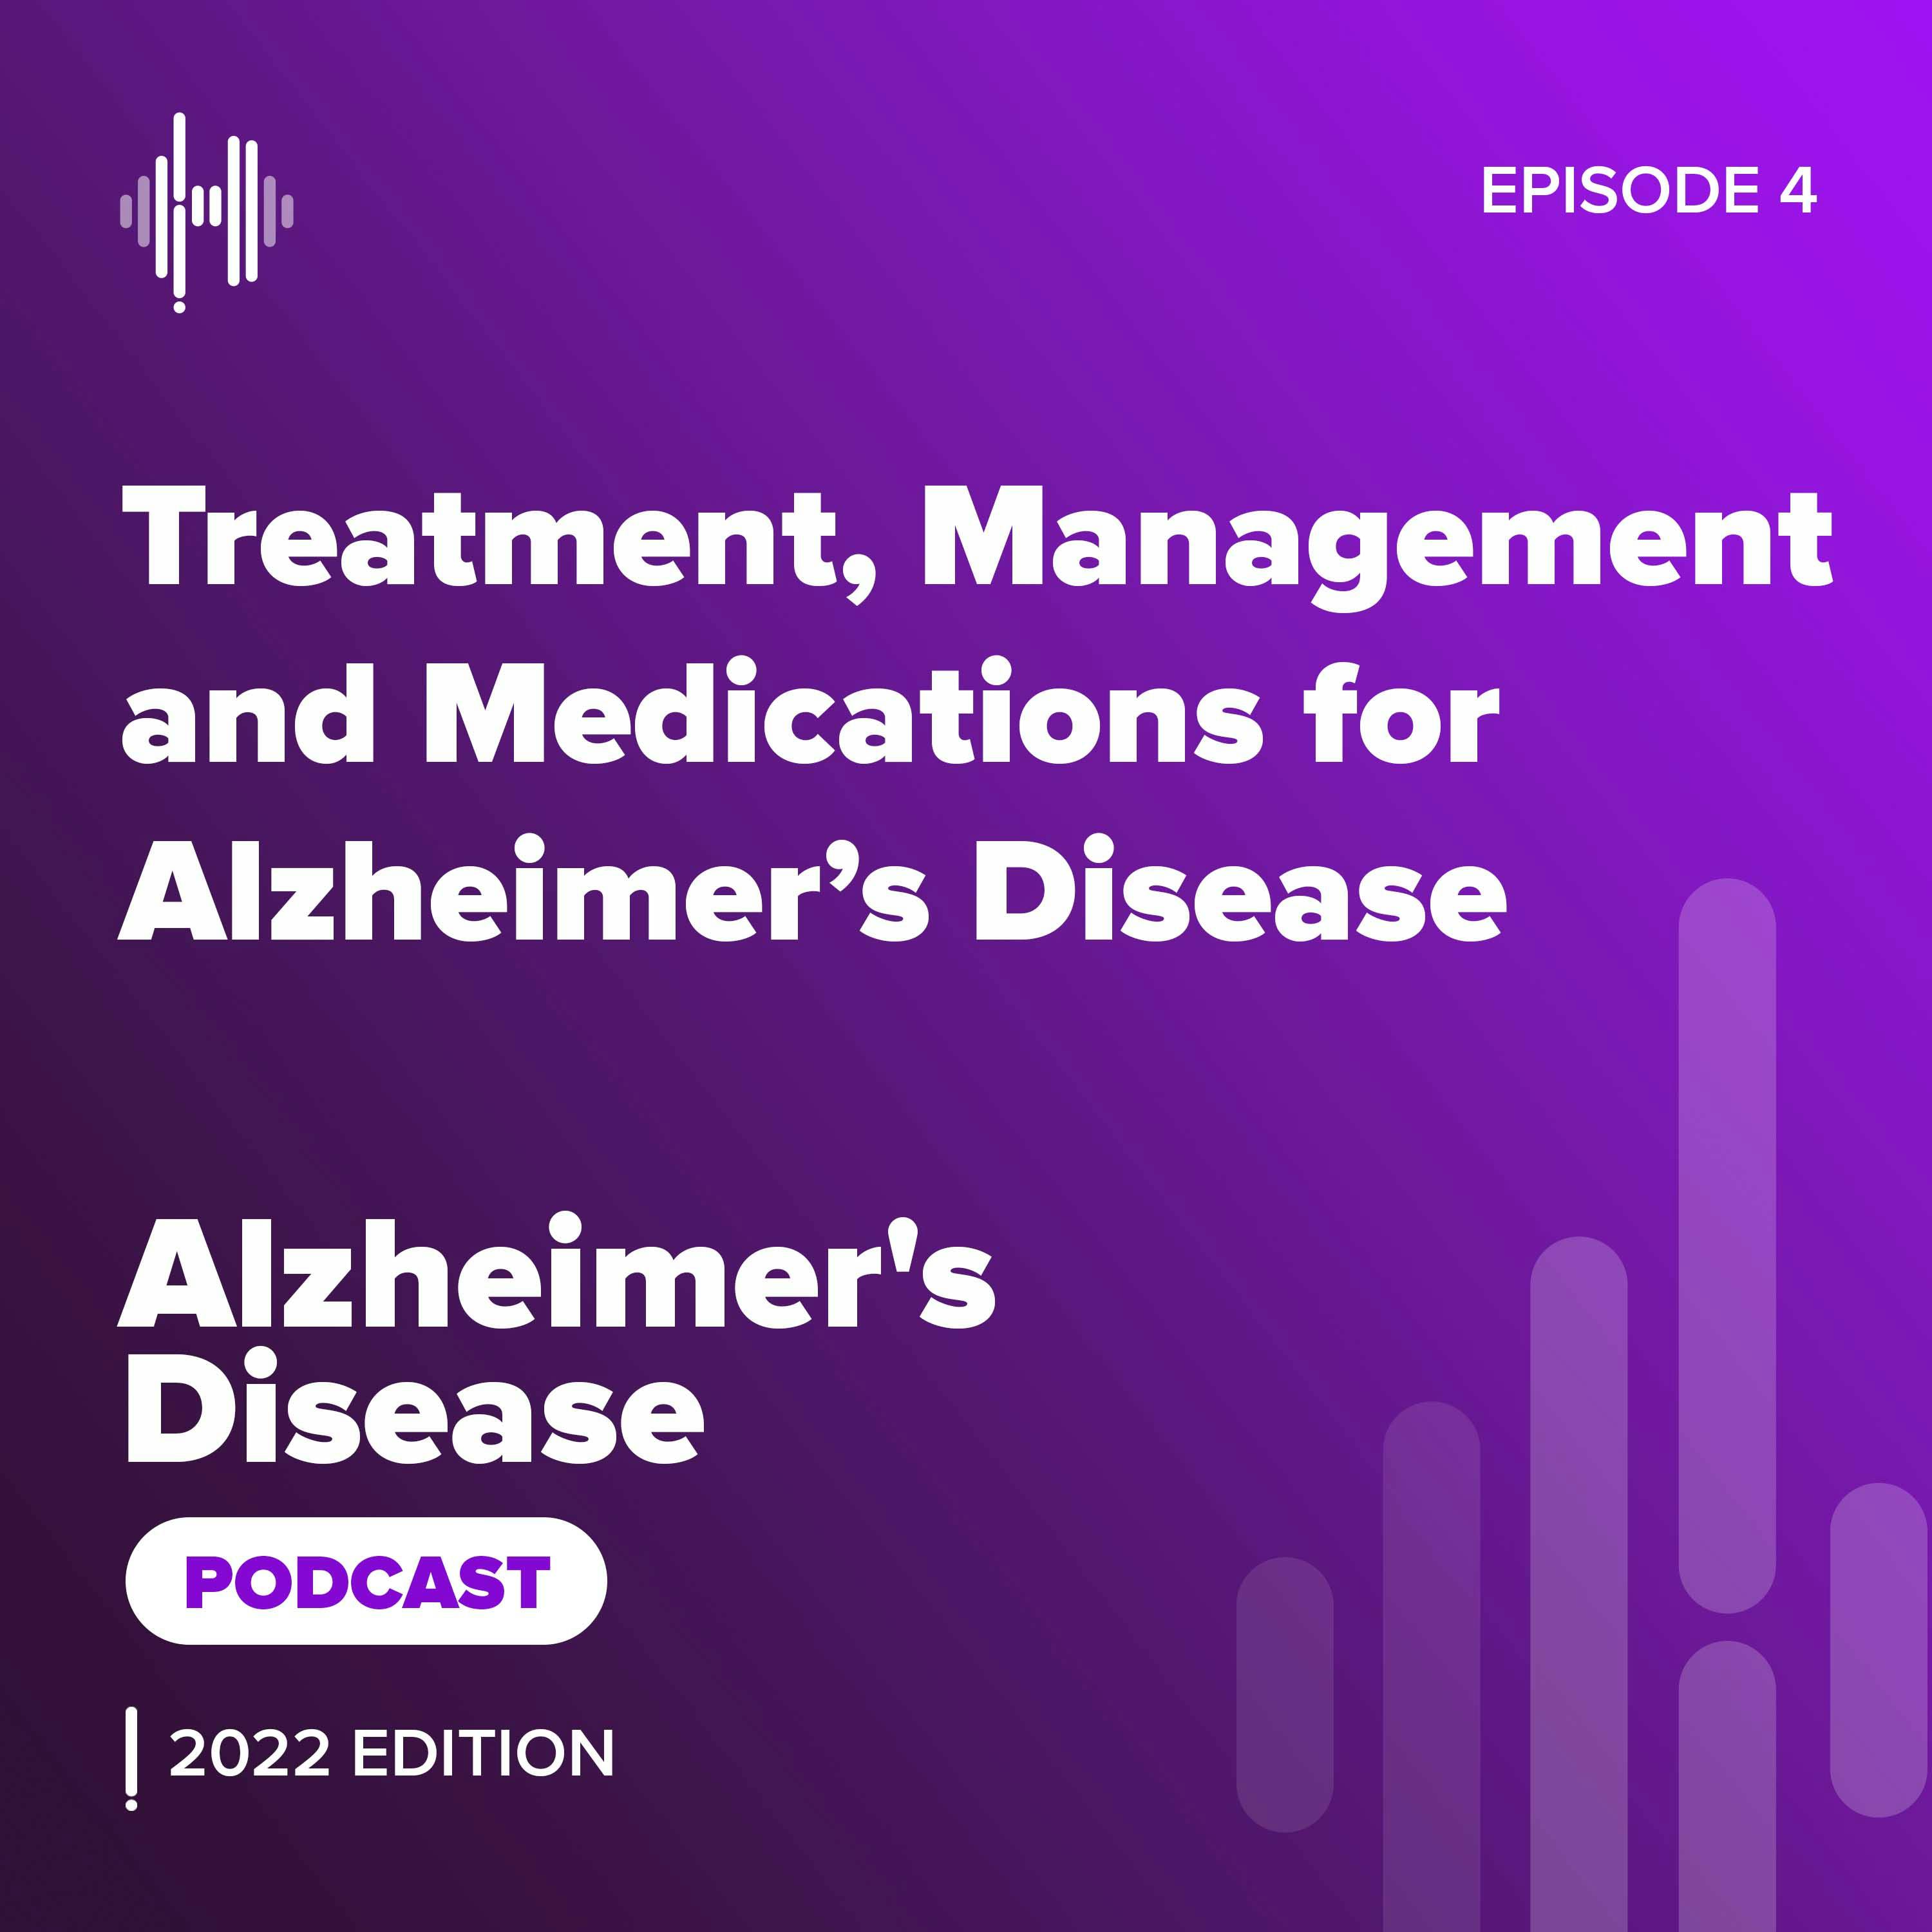 Ep 4: Treatment, Management and Medications for Alzheimer’s Disease